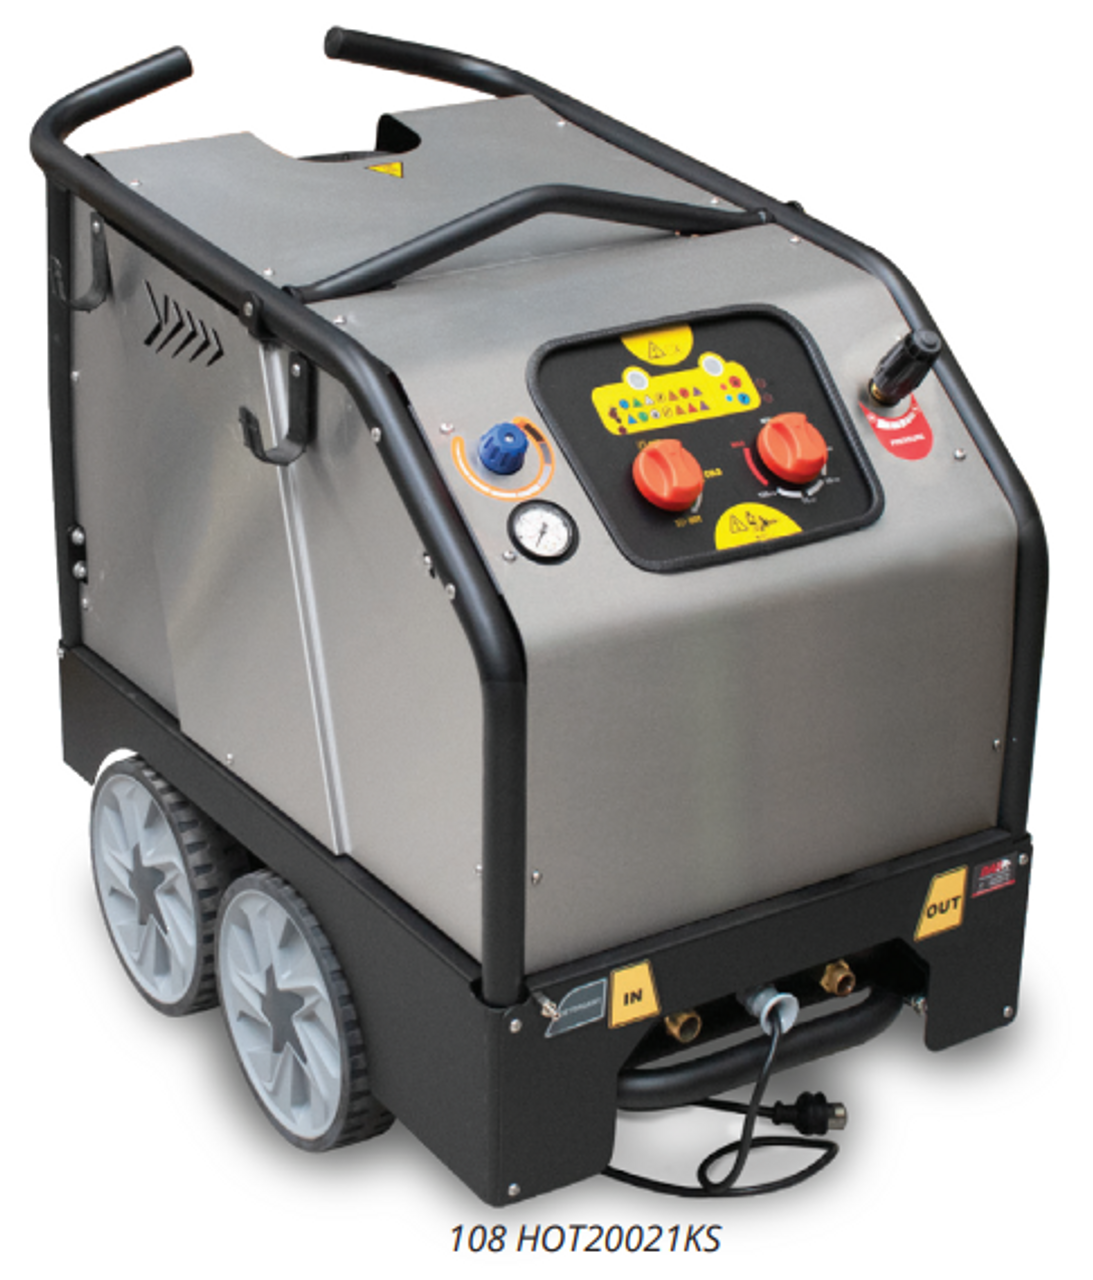 2900 PSI | 21 LPM Comet Hot Water Pressure Washer 3-Phase